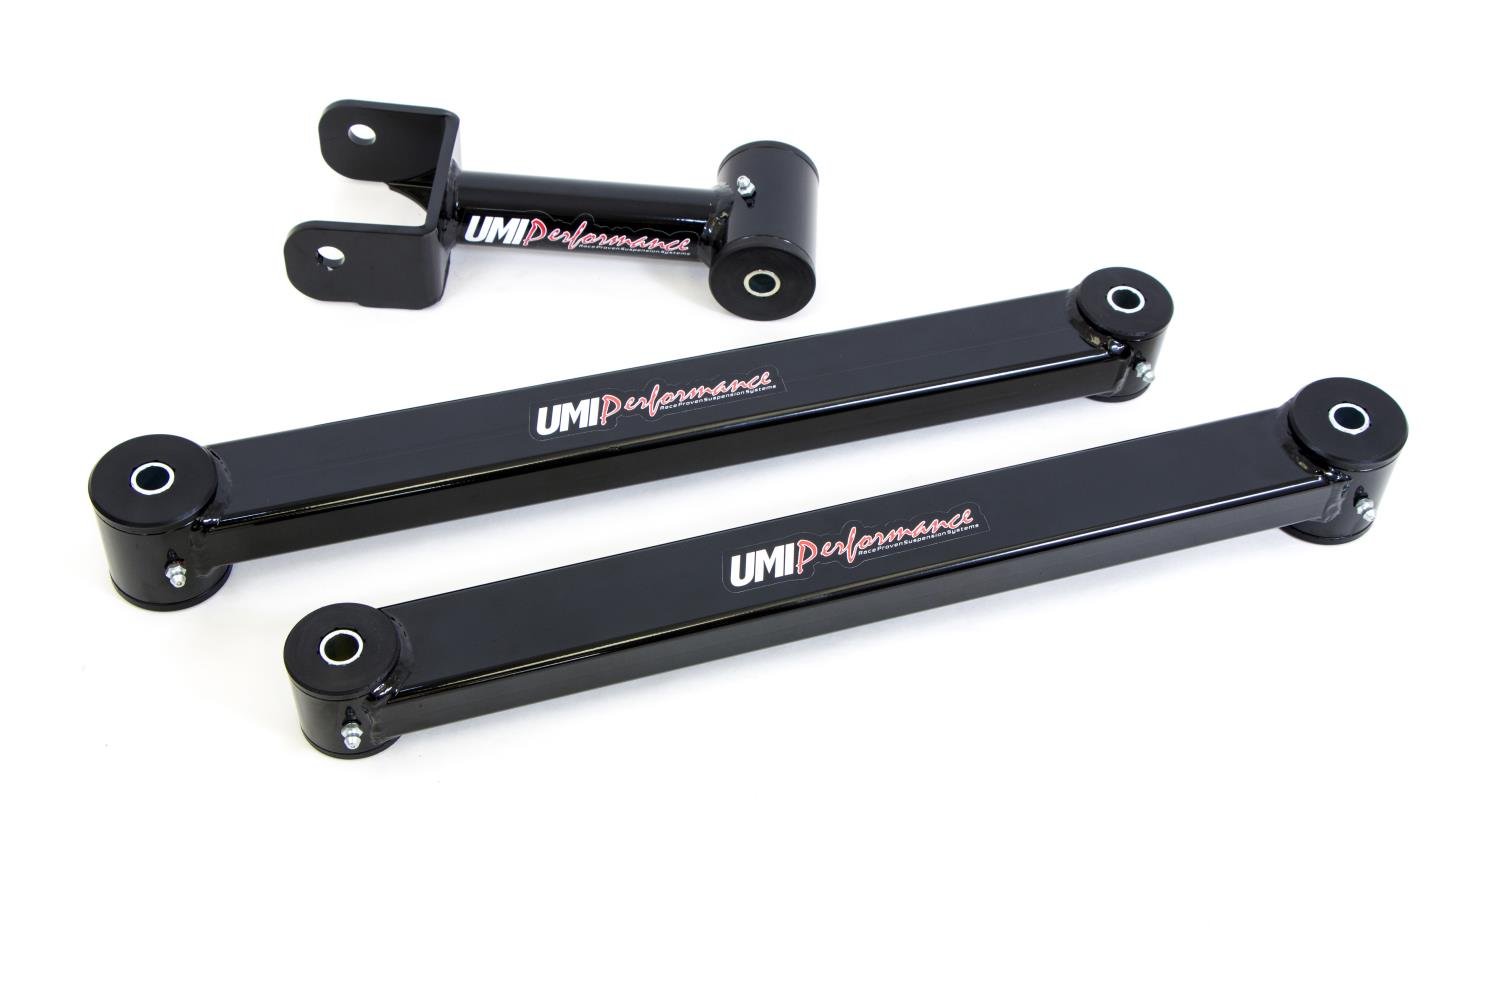 This non-adjustable rear suspension kit from UMI replaces the upper control arm and lower rear contr